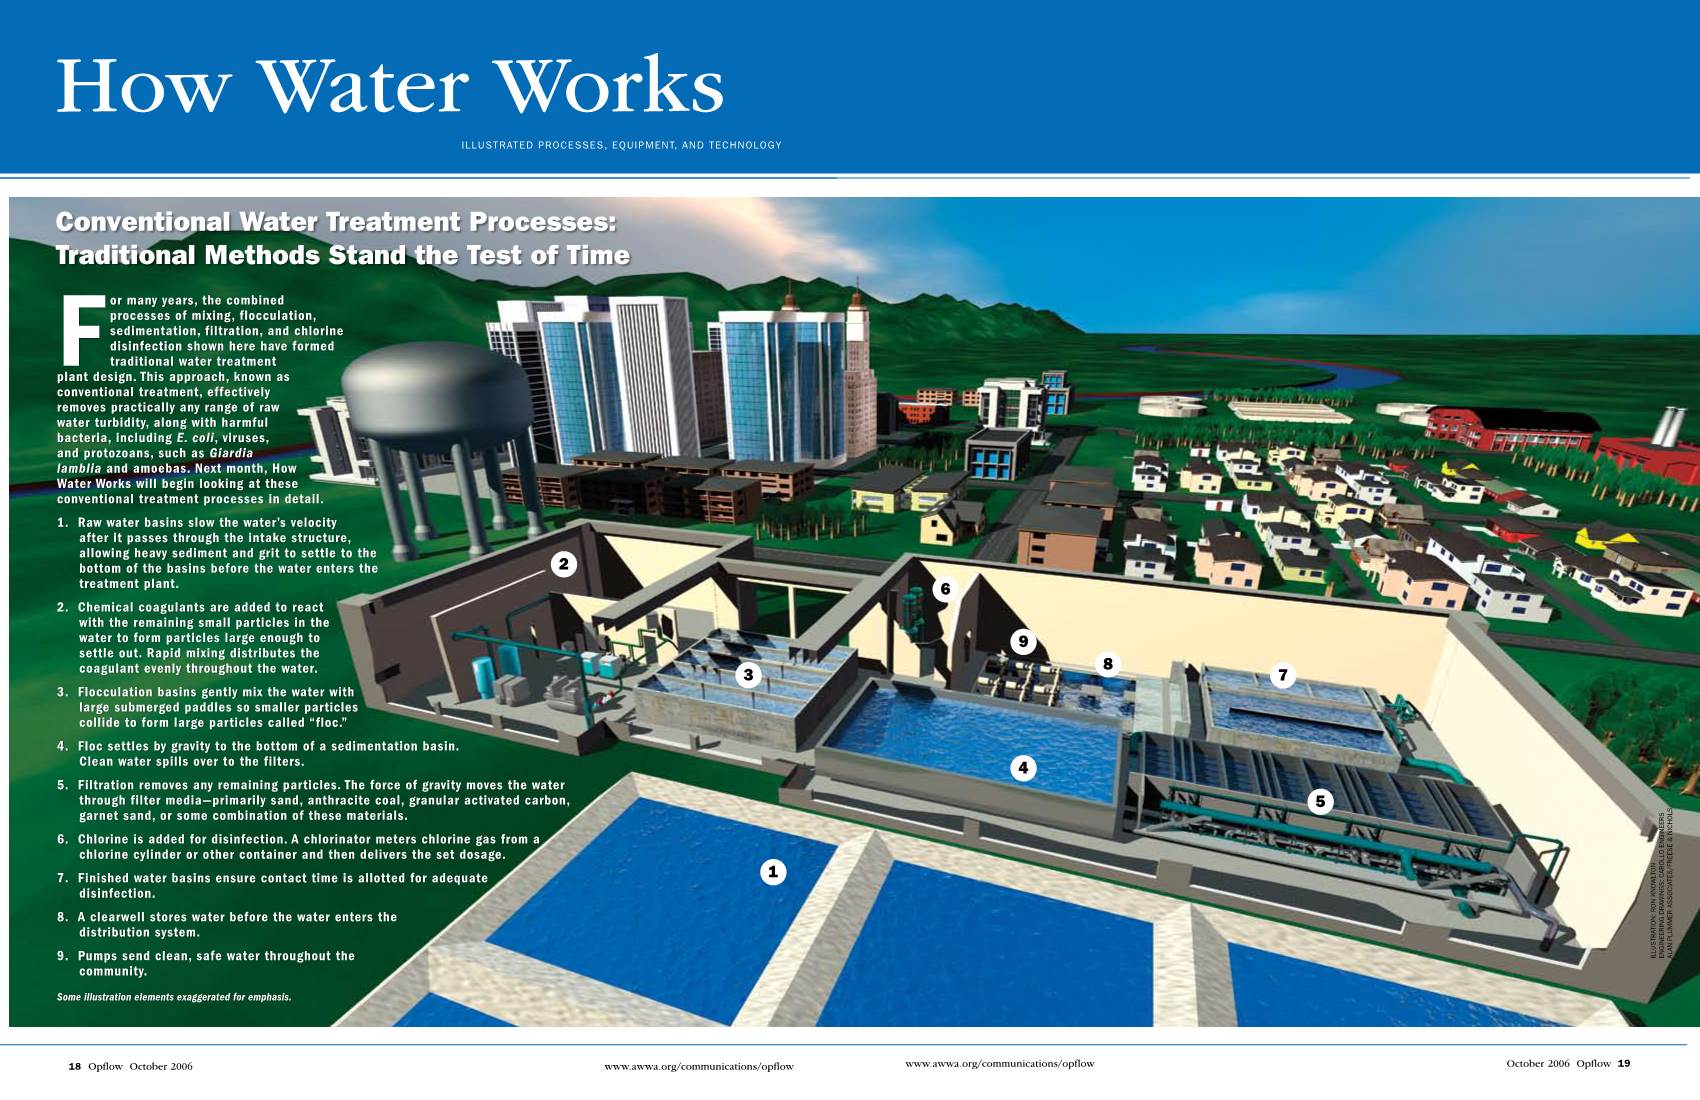 Conventional Water Treatment Processes Part 1